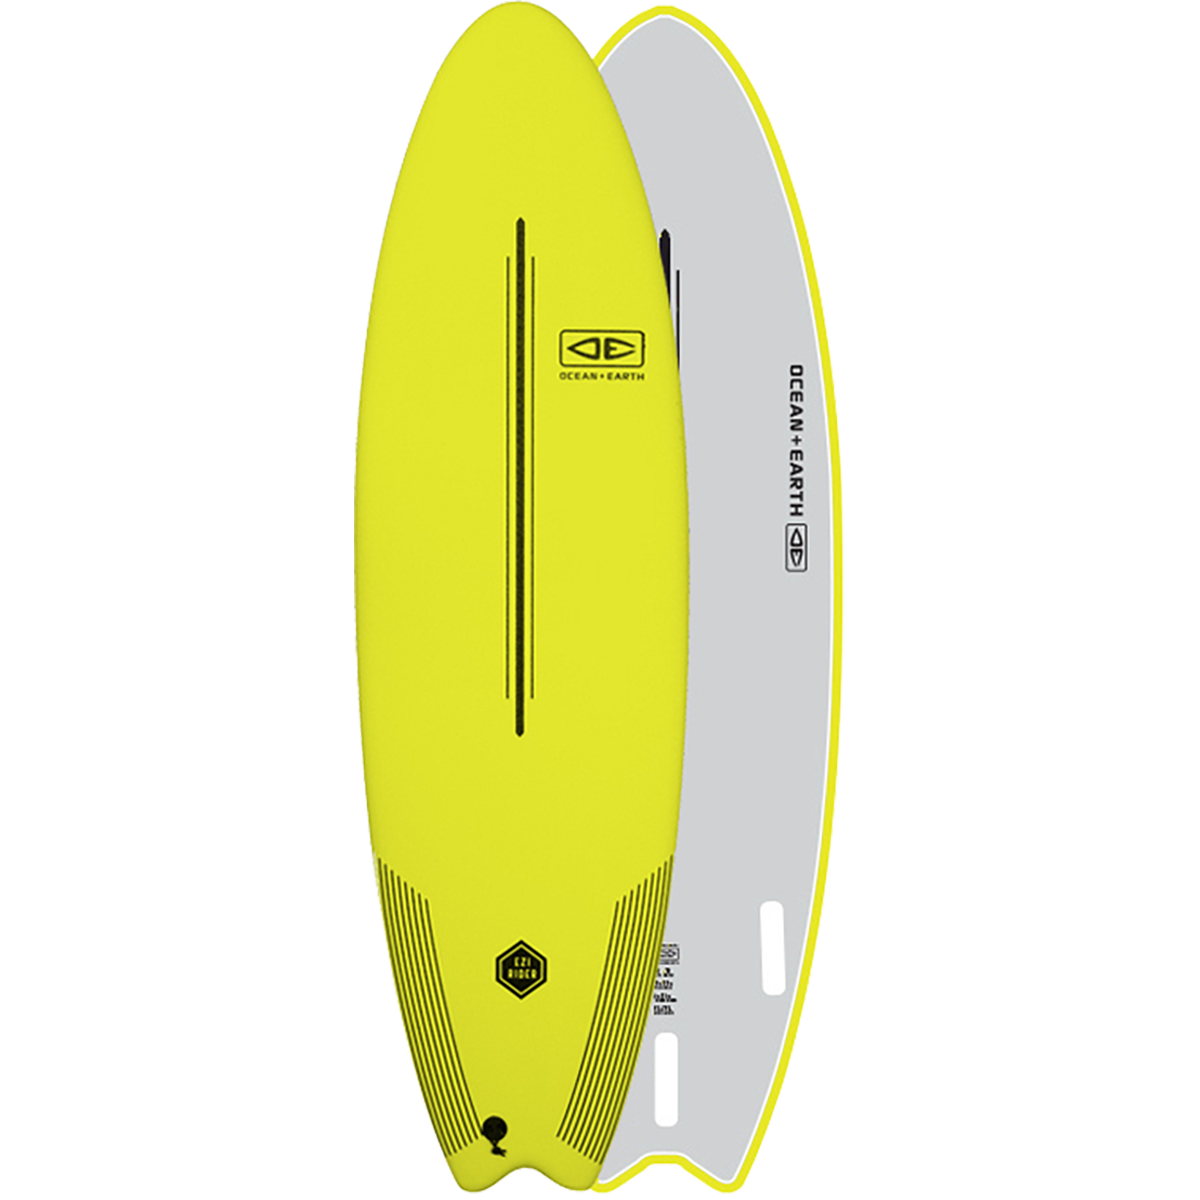 Ocean and Earth Soft Top Surfboard Ezi-Rider 5'6" Lime - Invisible Board Shop